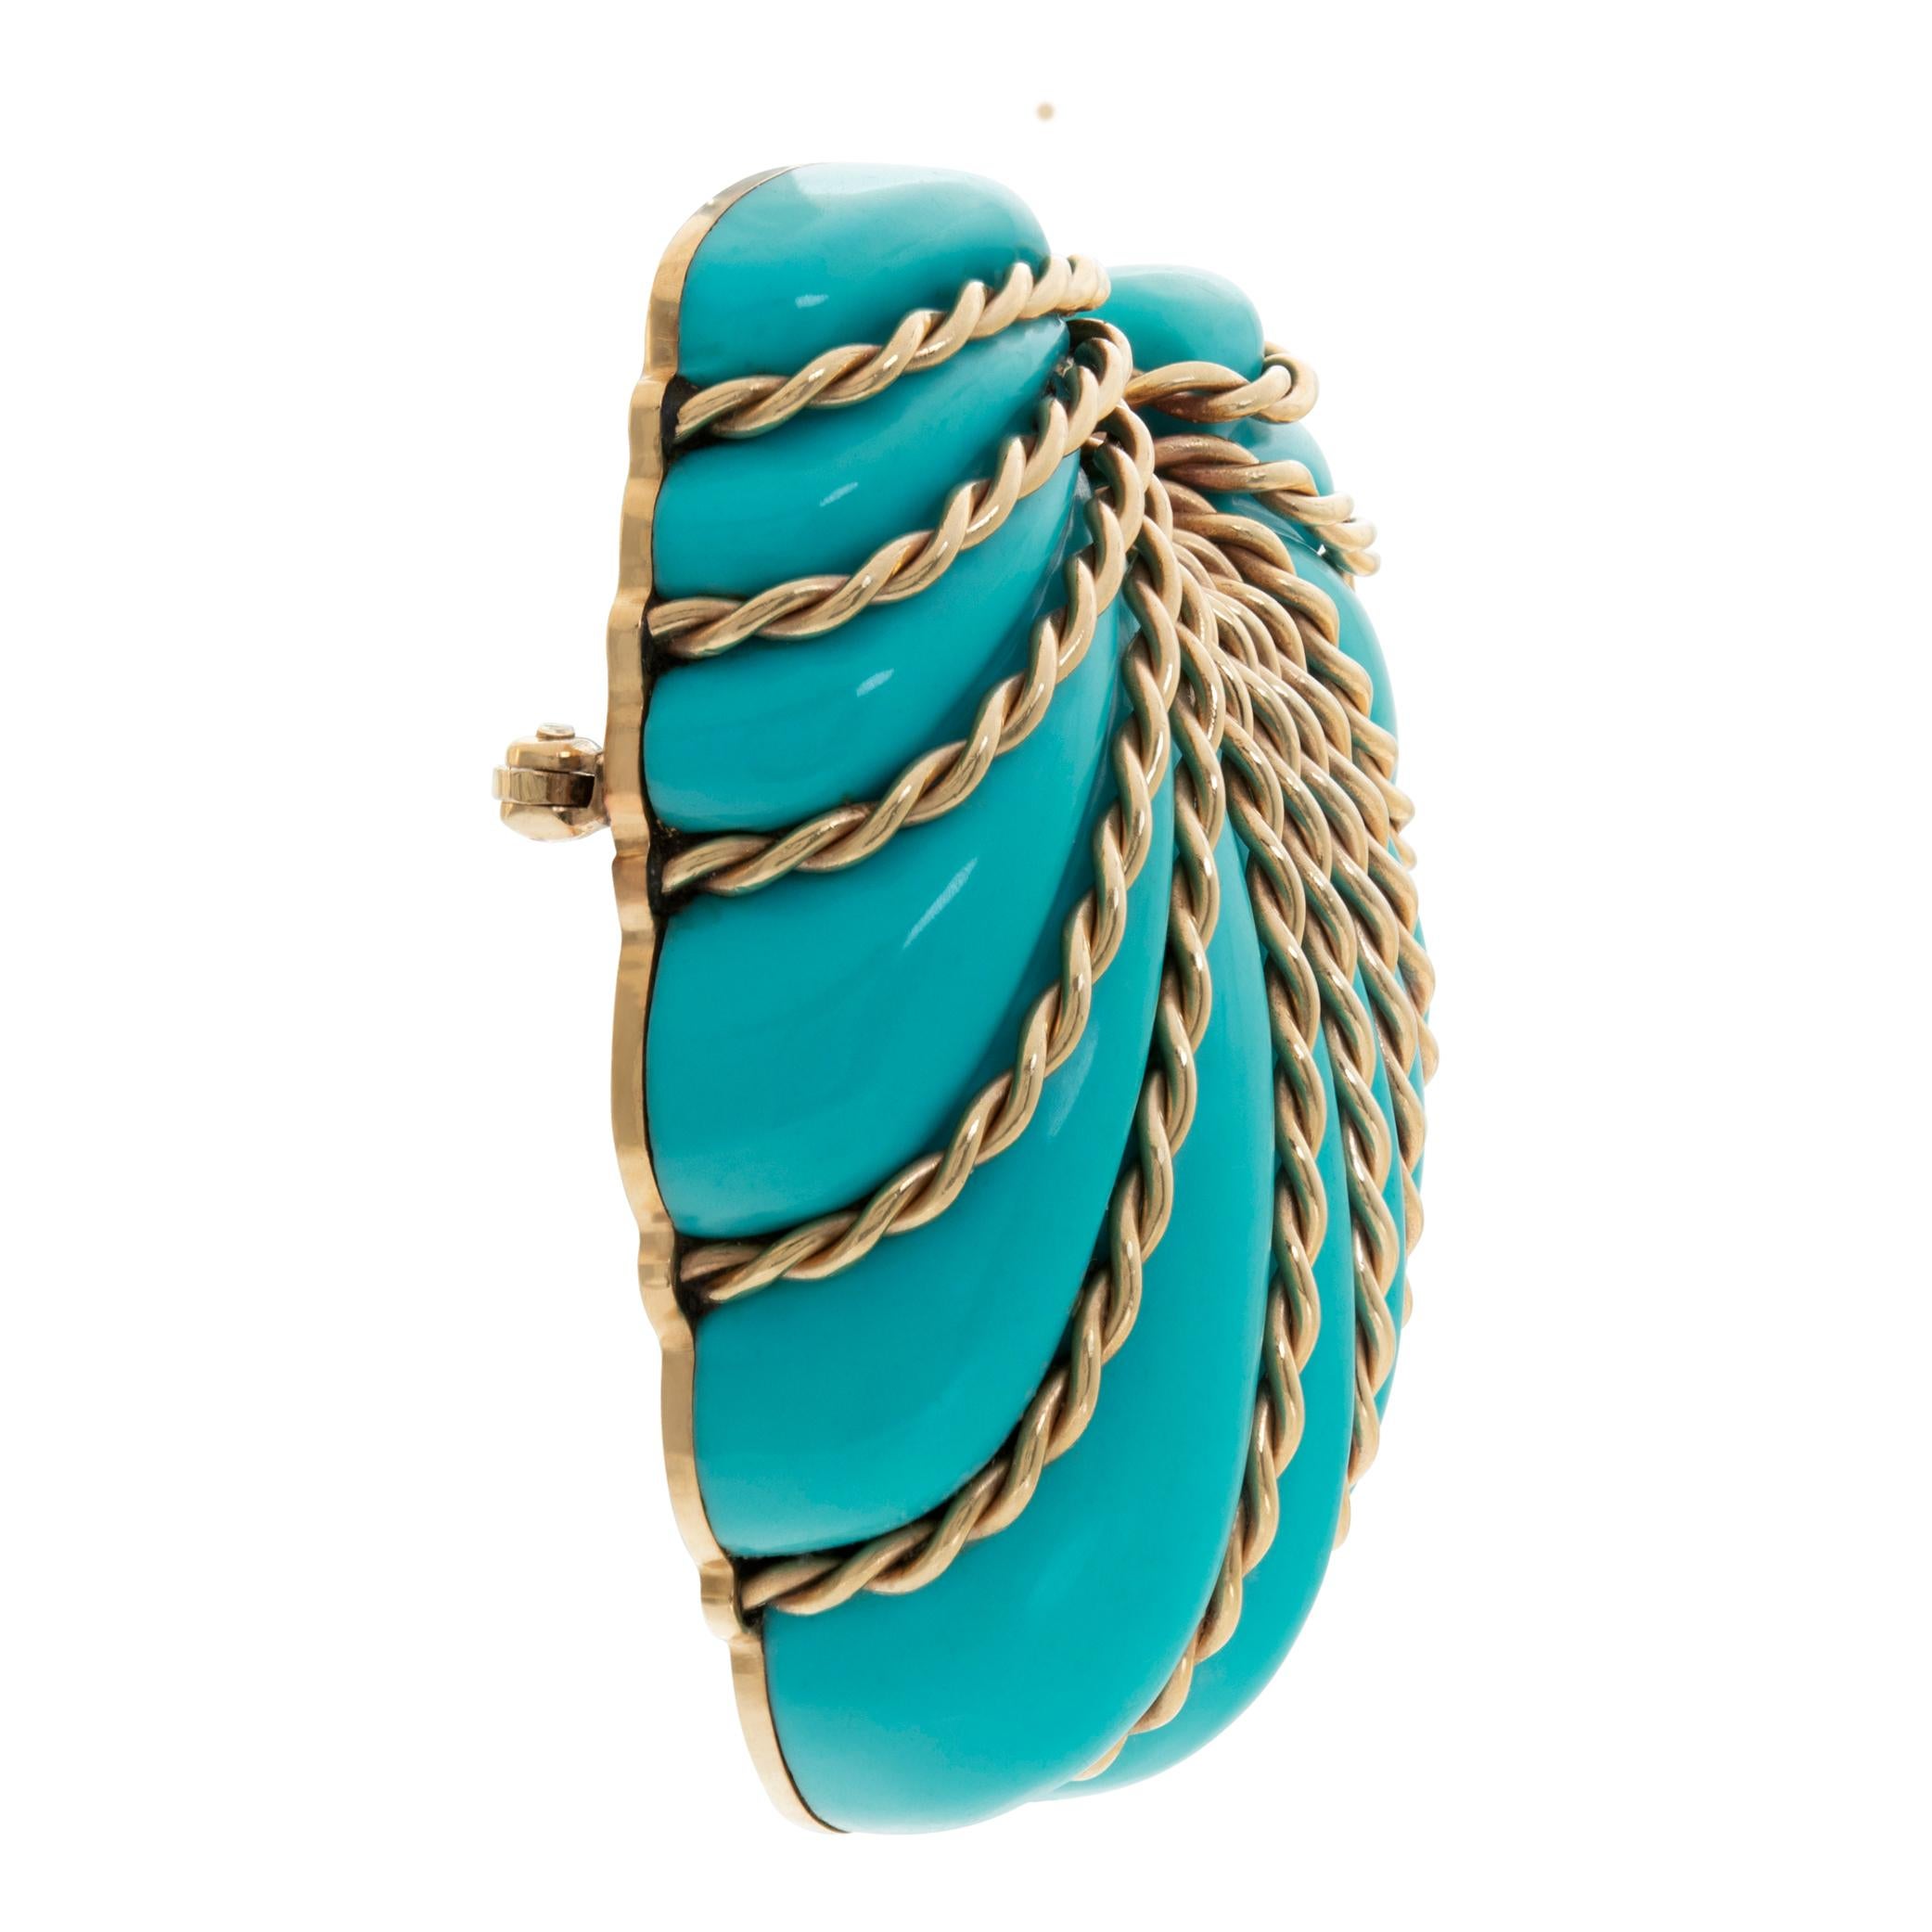 Seaman Schepps Turquoise Shell 14k gold Brooch In Excellent Condition For Sale In Surfside, FL